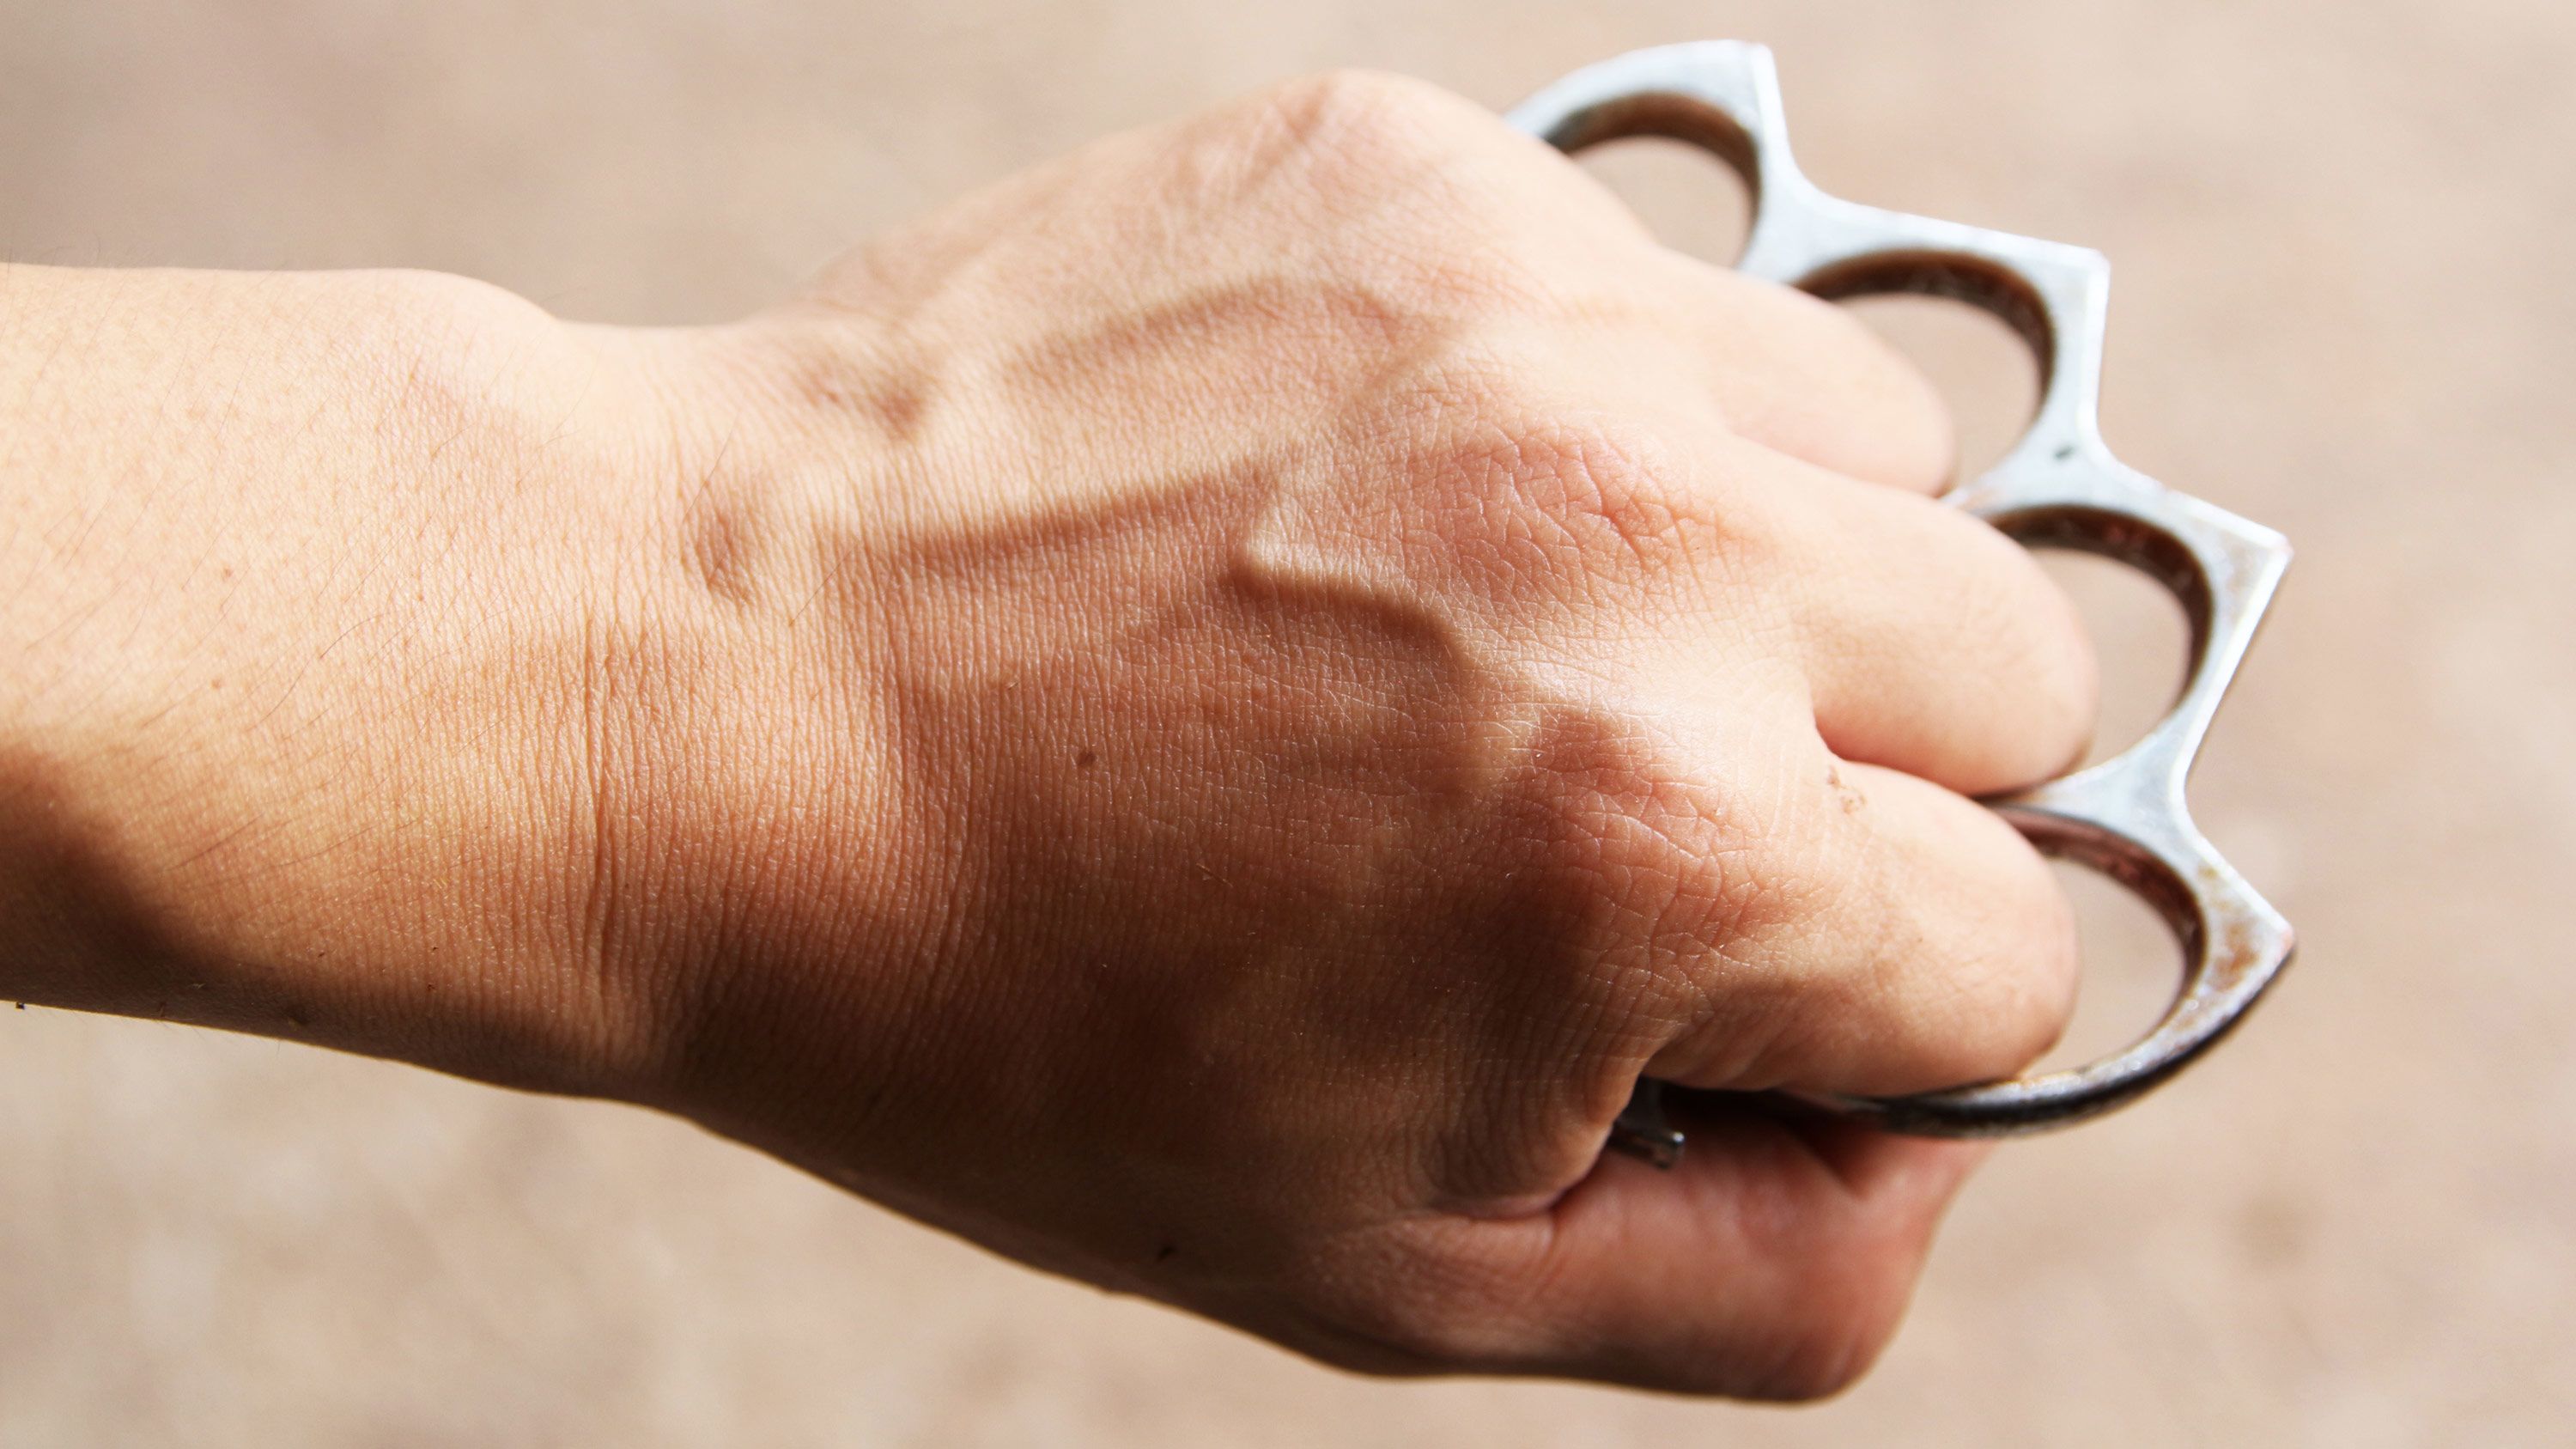 It's now legal to carry brass knuckles in Texas. Because, 'self